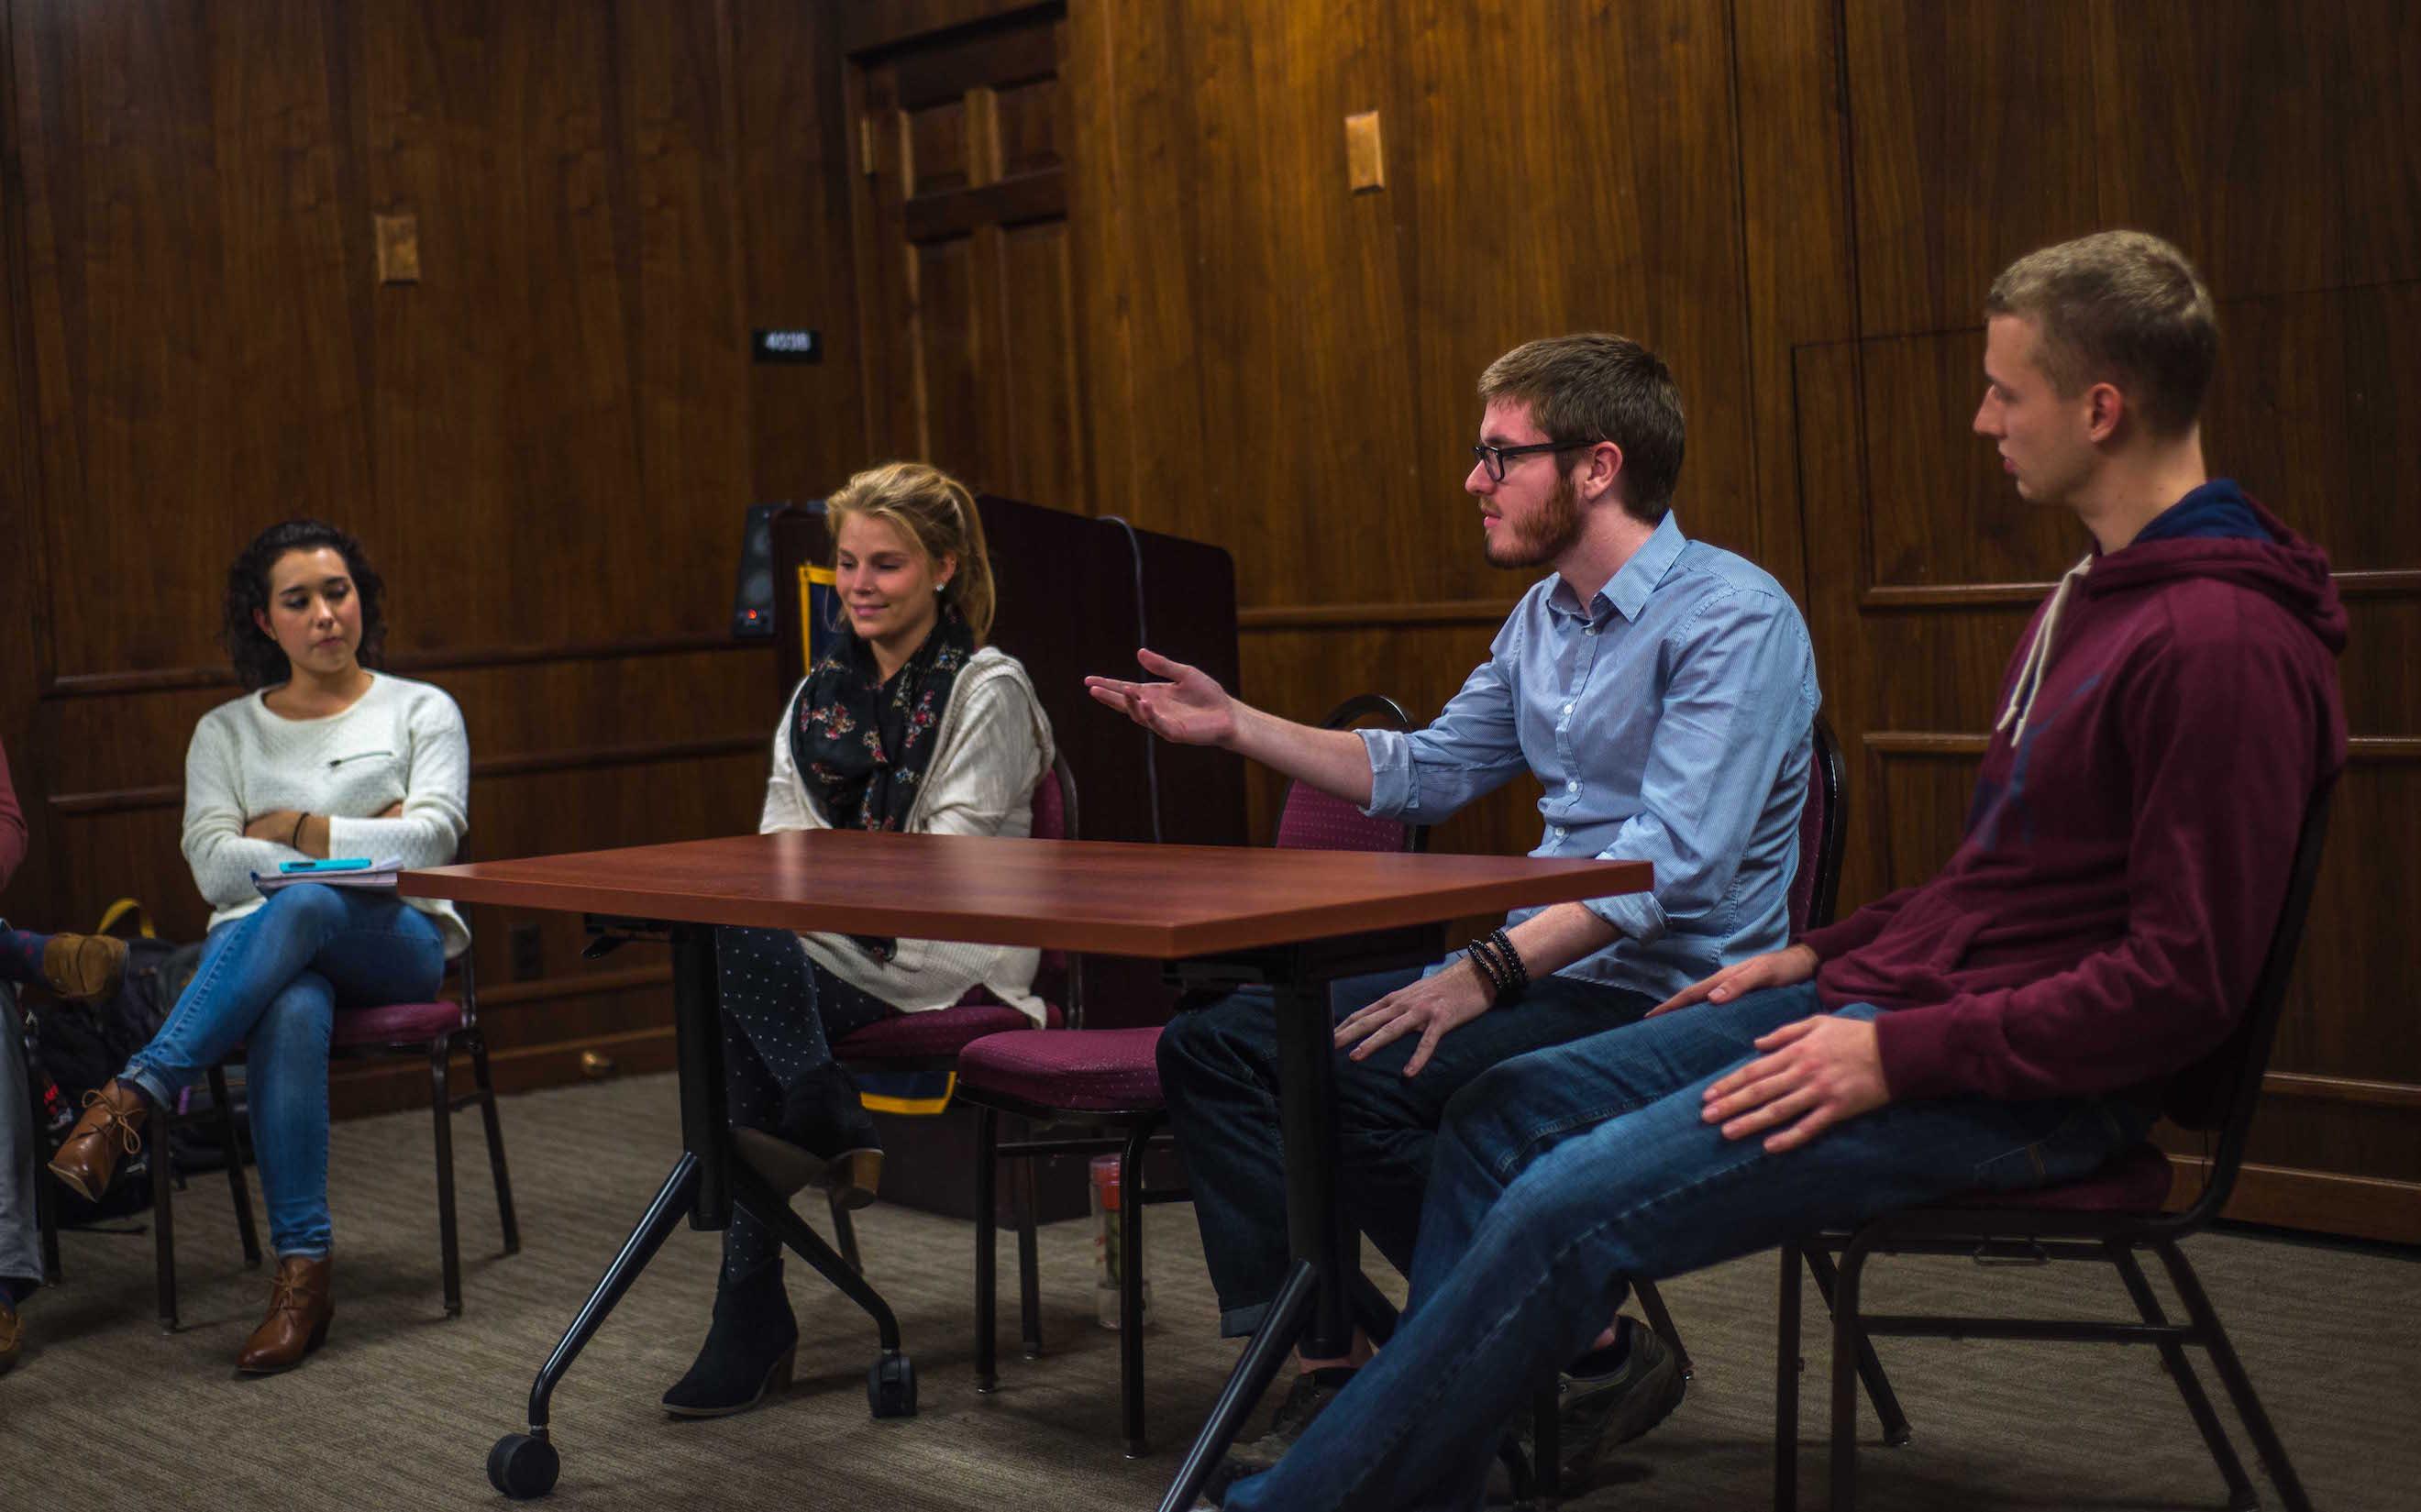 Students gather to talk about their experiences returning home after studying abroad. Left to right: Sophia Boyd, Monika Cinch, John Tobin, and Cody Bauer